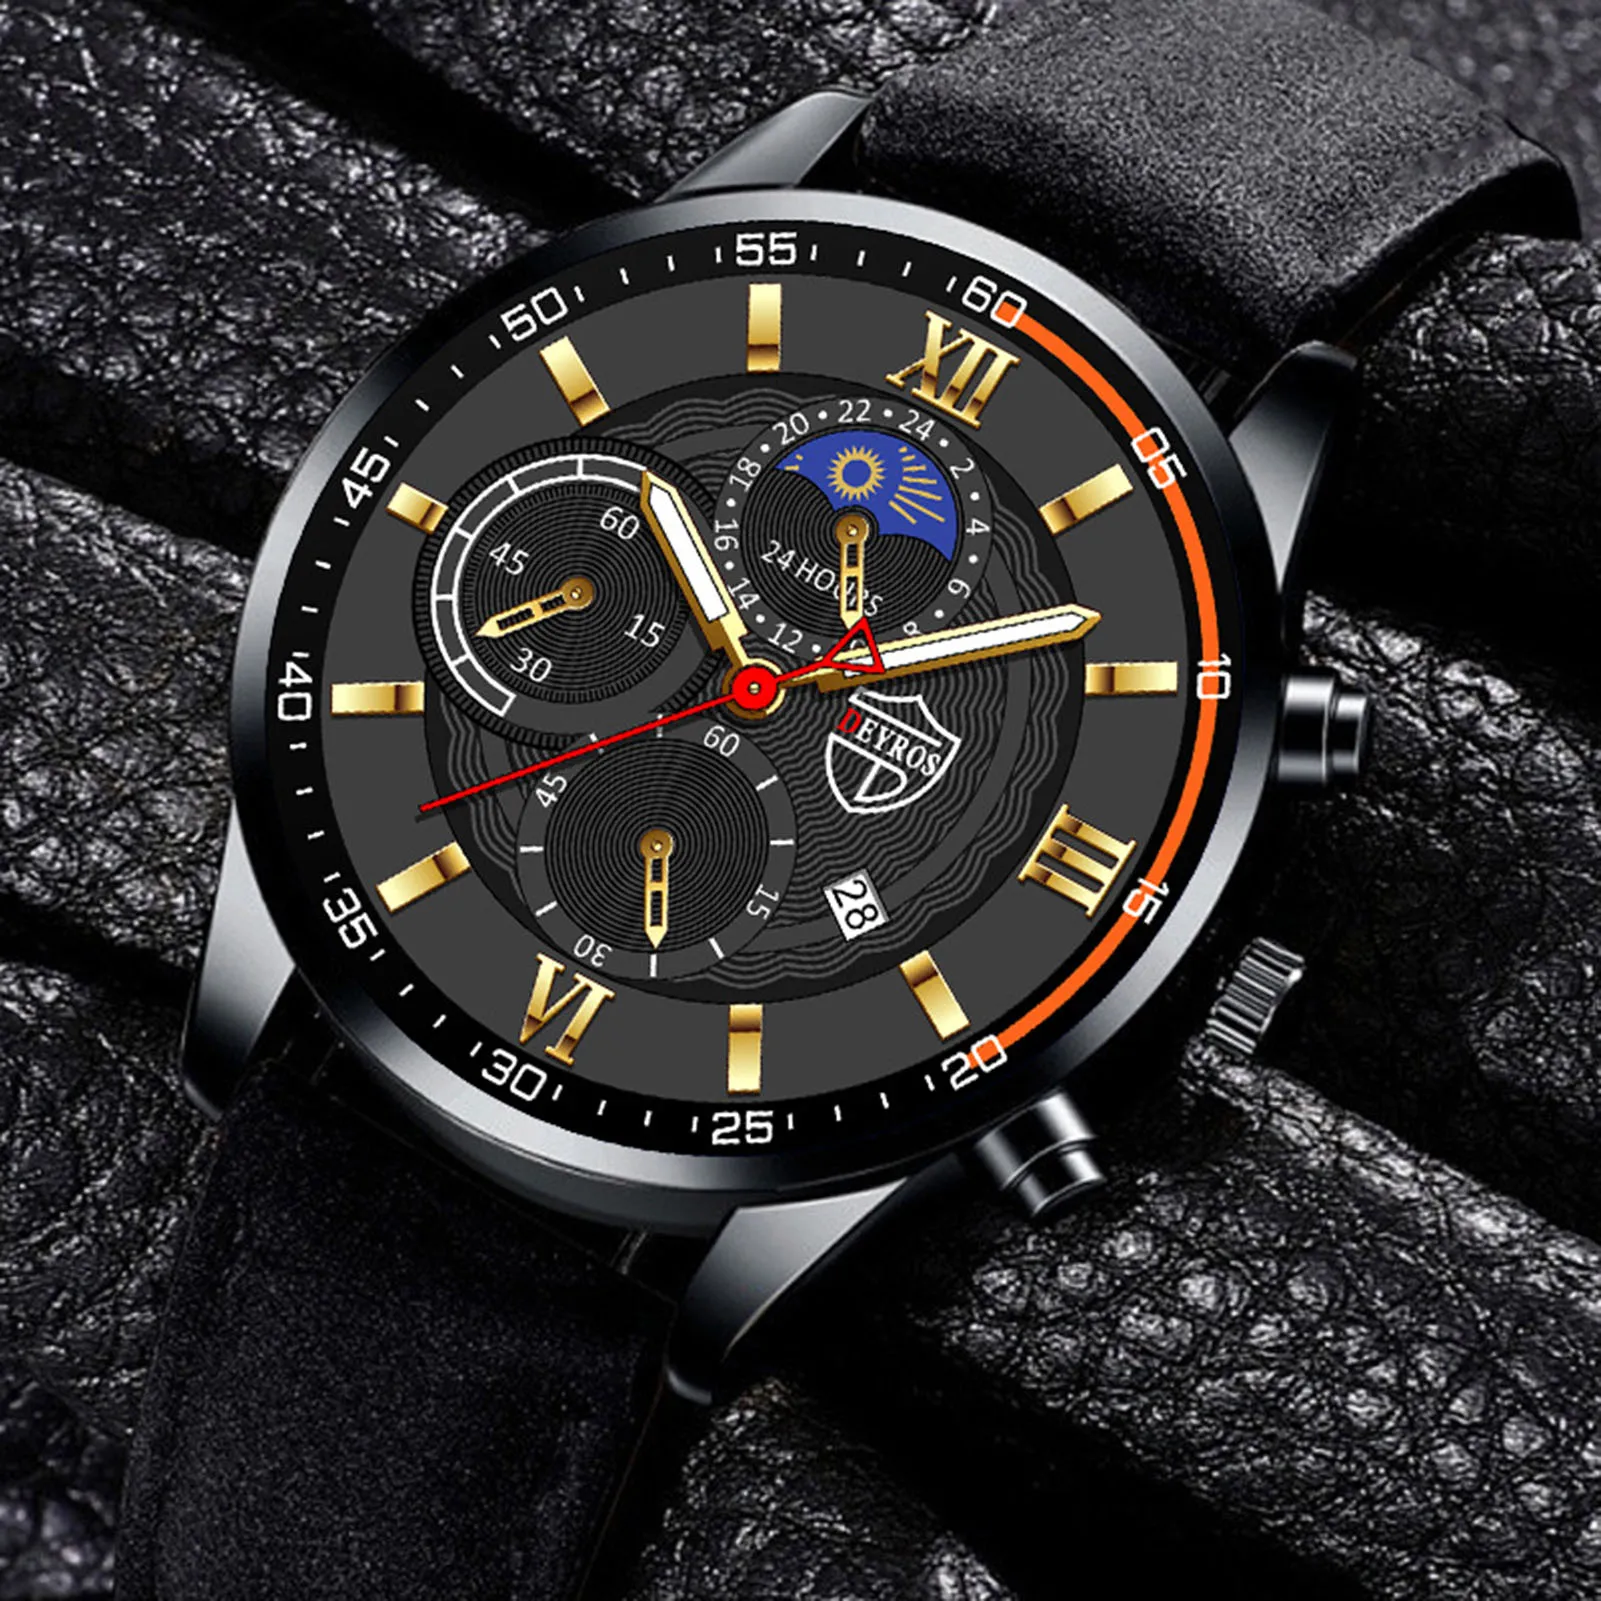 

Men's Watches Fake 3-Eyes 6-Pointers with Calendar Sports Luminous Wristwatch Pin Buckle Style Man's Time Viewer Gift H9